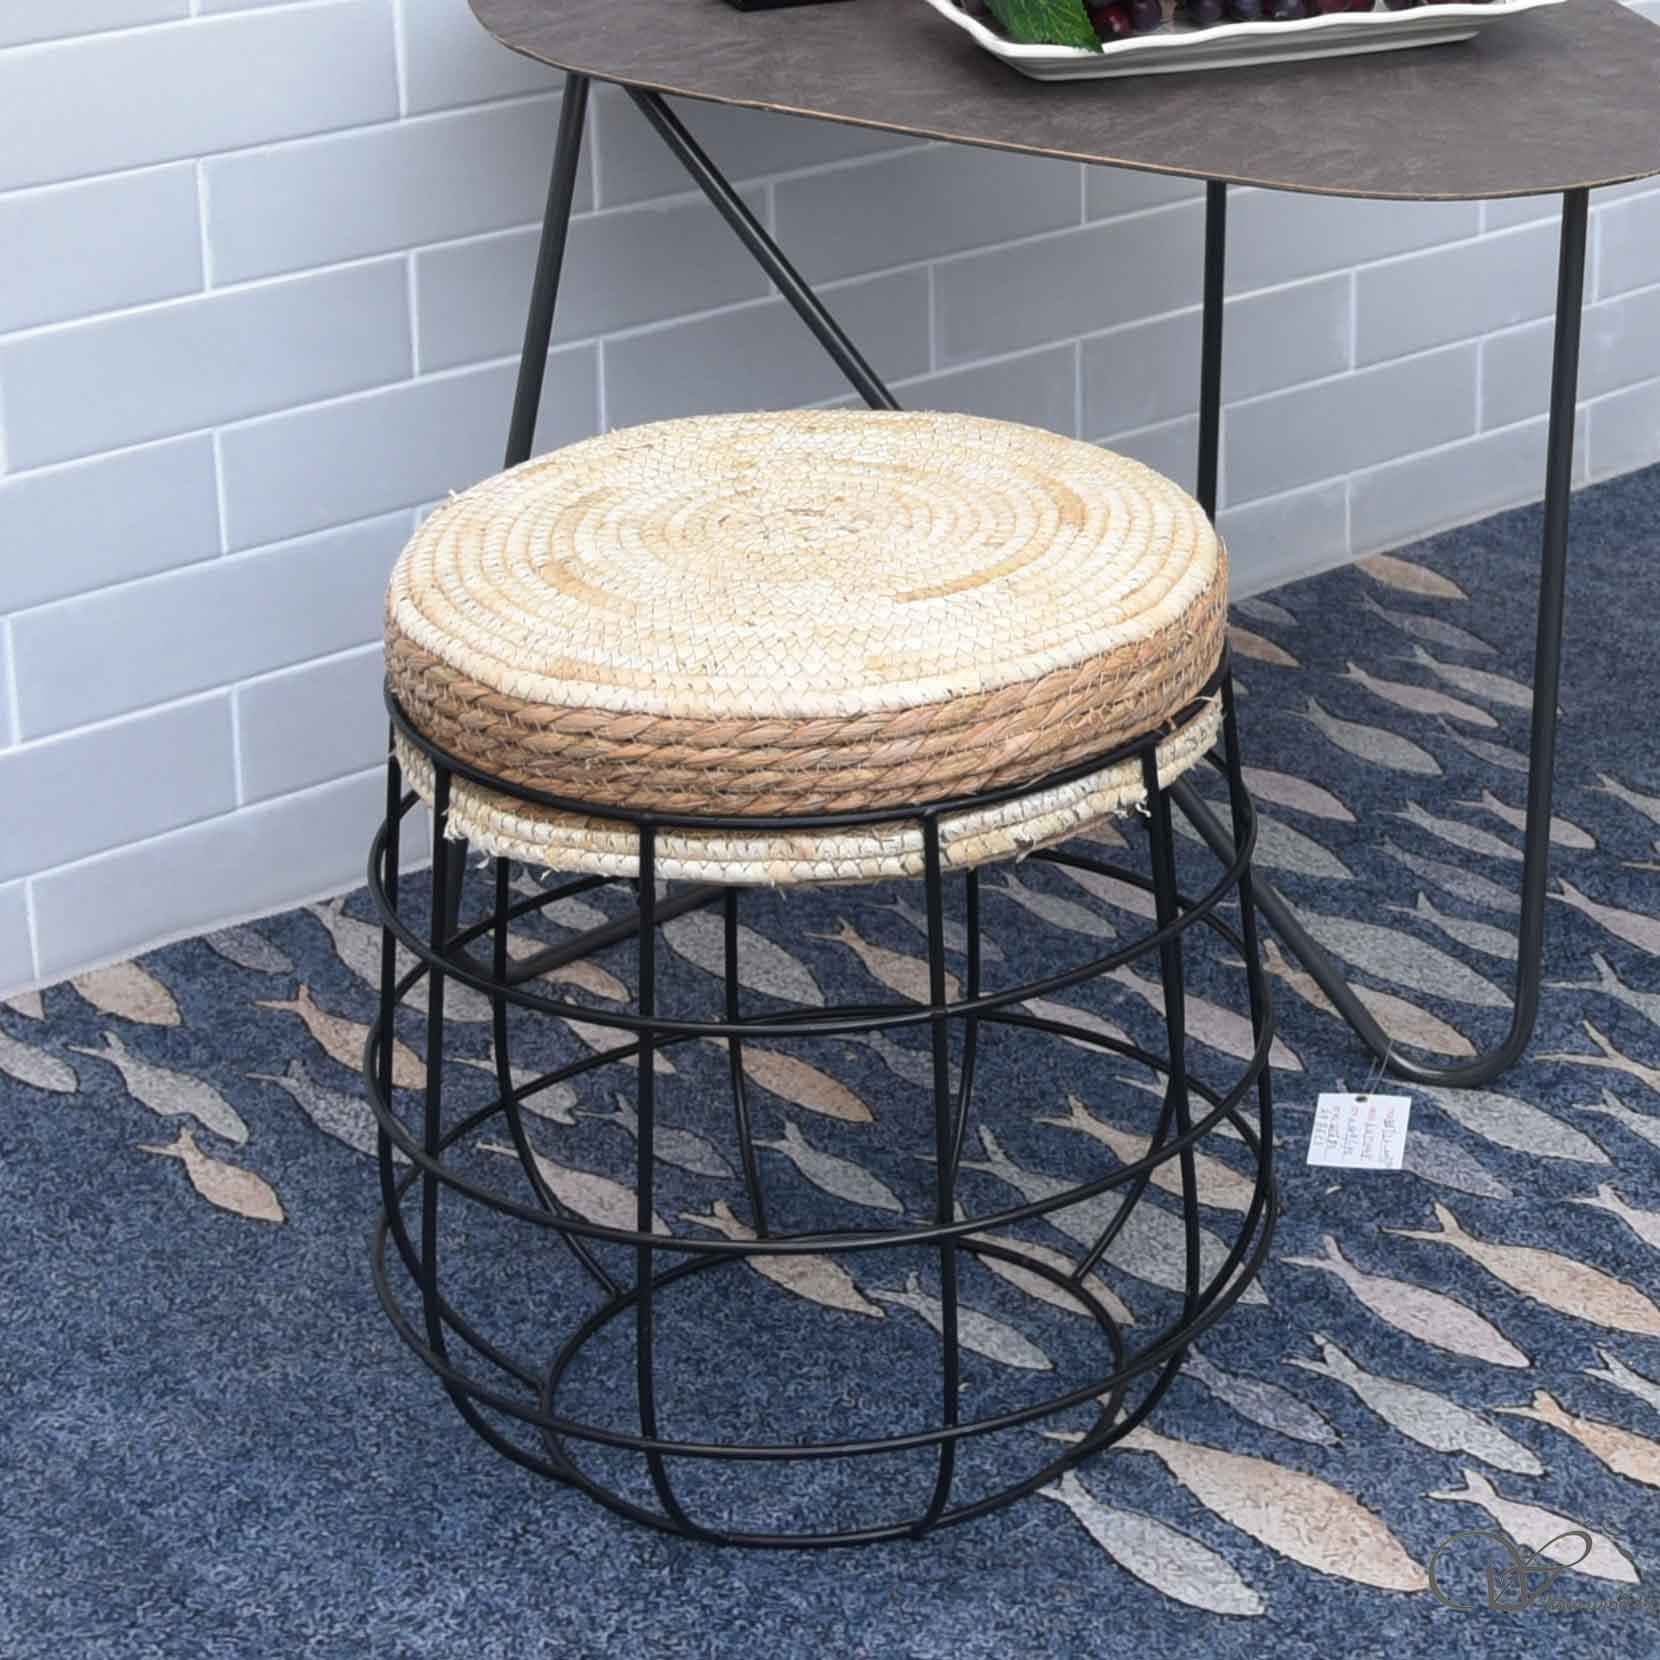 Round Cushioned Furniture Water Hyacinth Footstool Ottoman with with wire storage legs